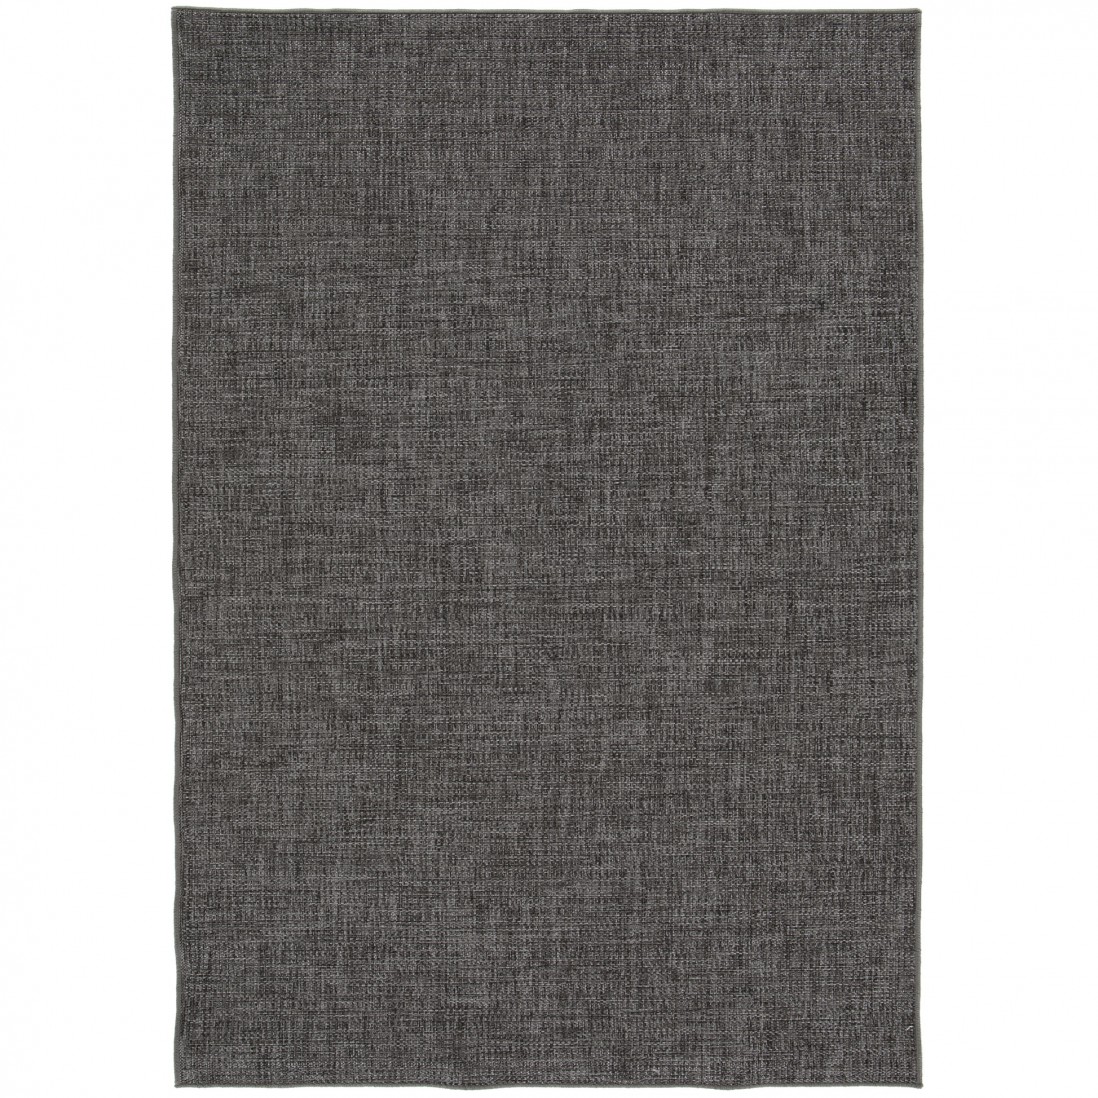 NOBLE 36307/094 AREA RUG